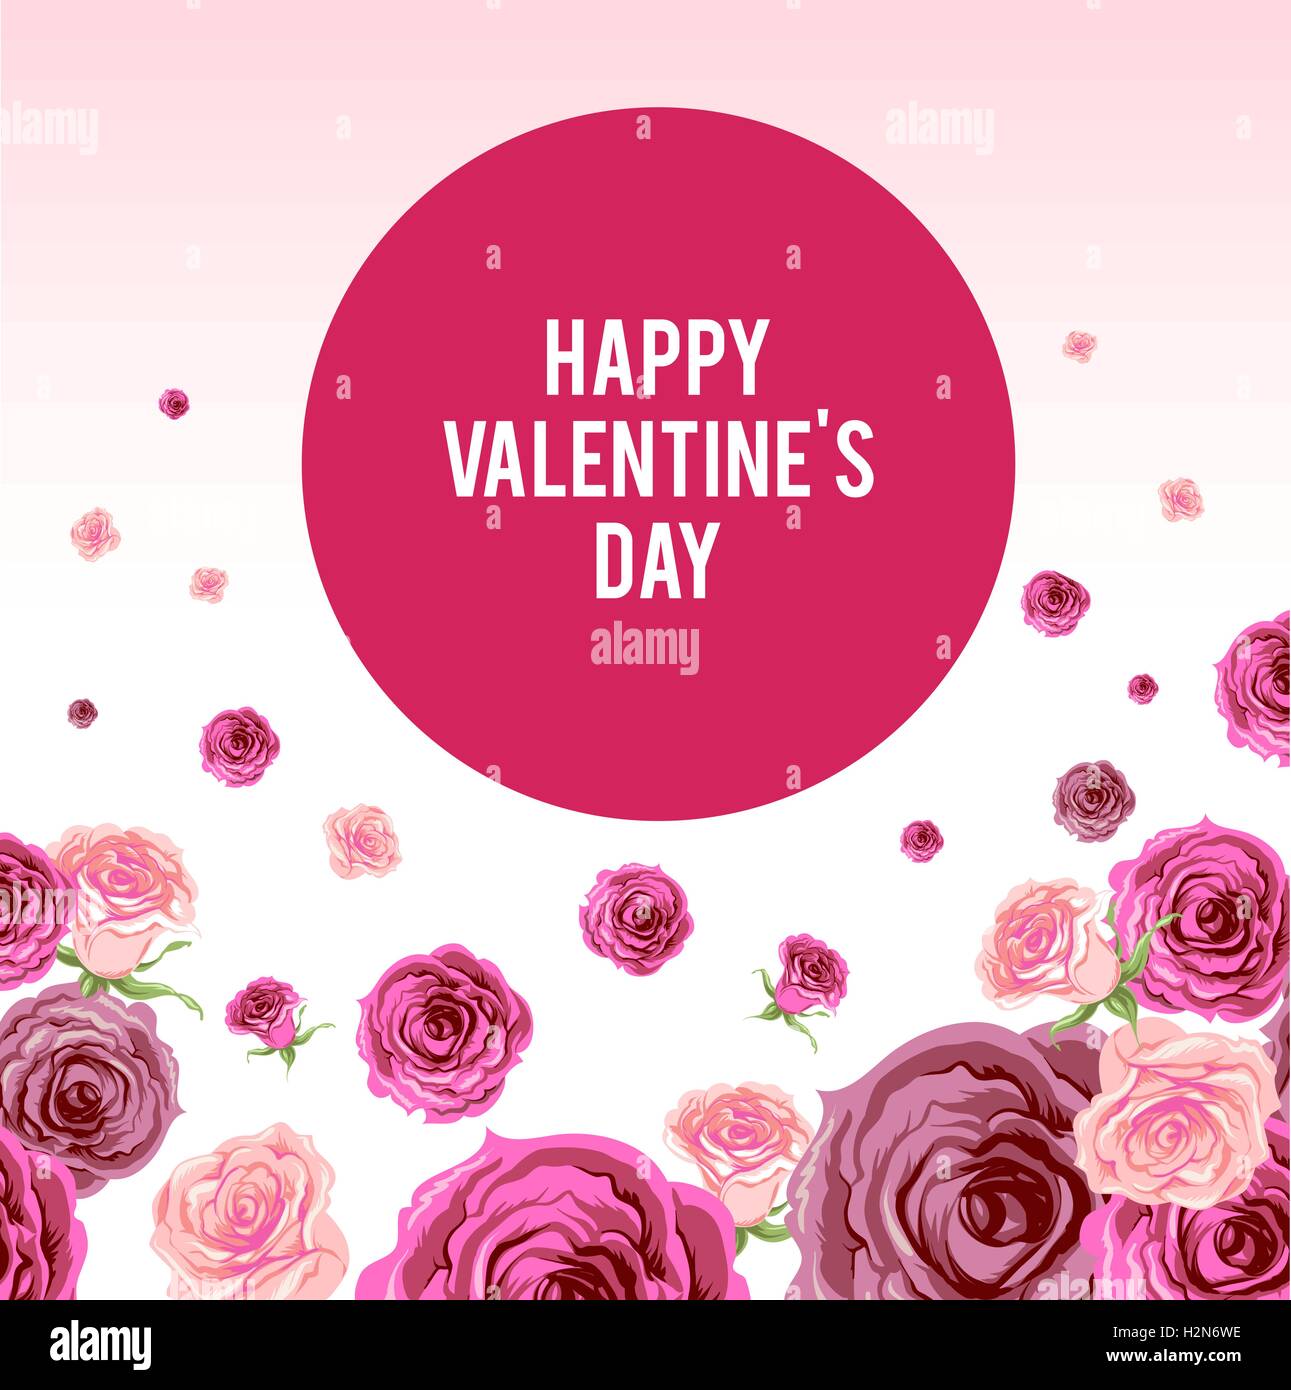 Valentine's day floral background Stock Vector